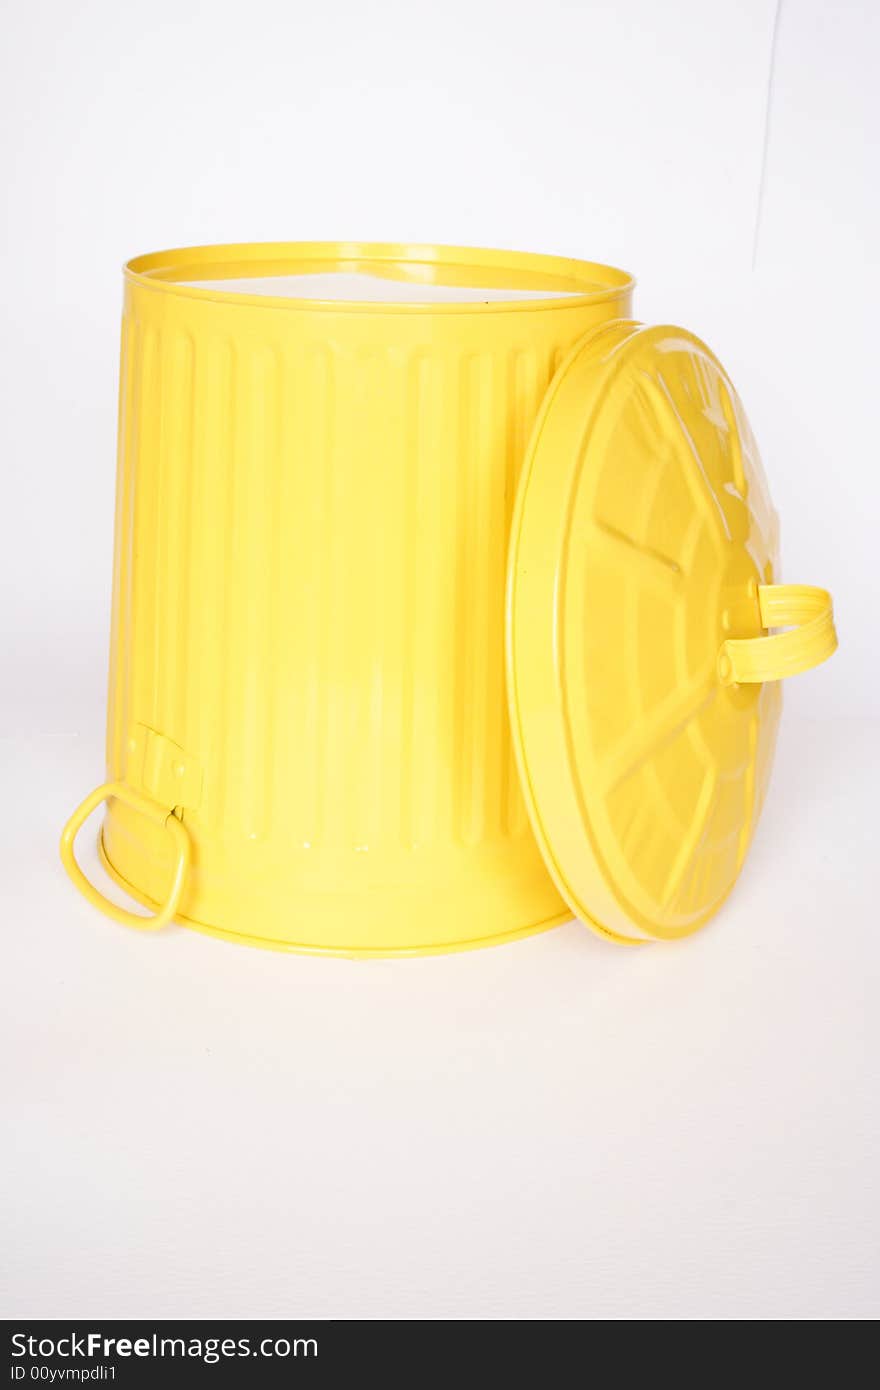 Dustbin with tap aside in white background